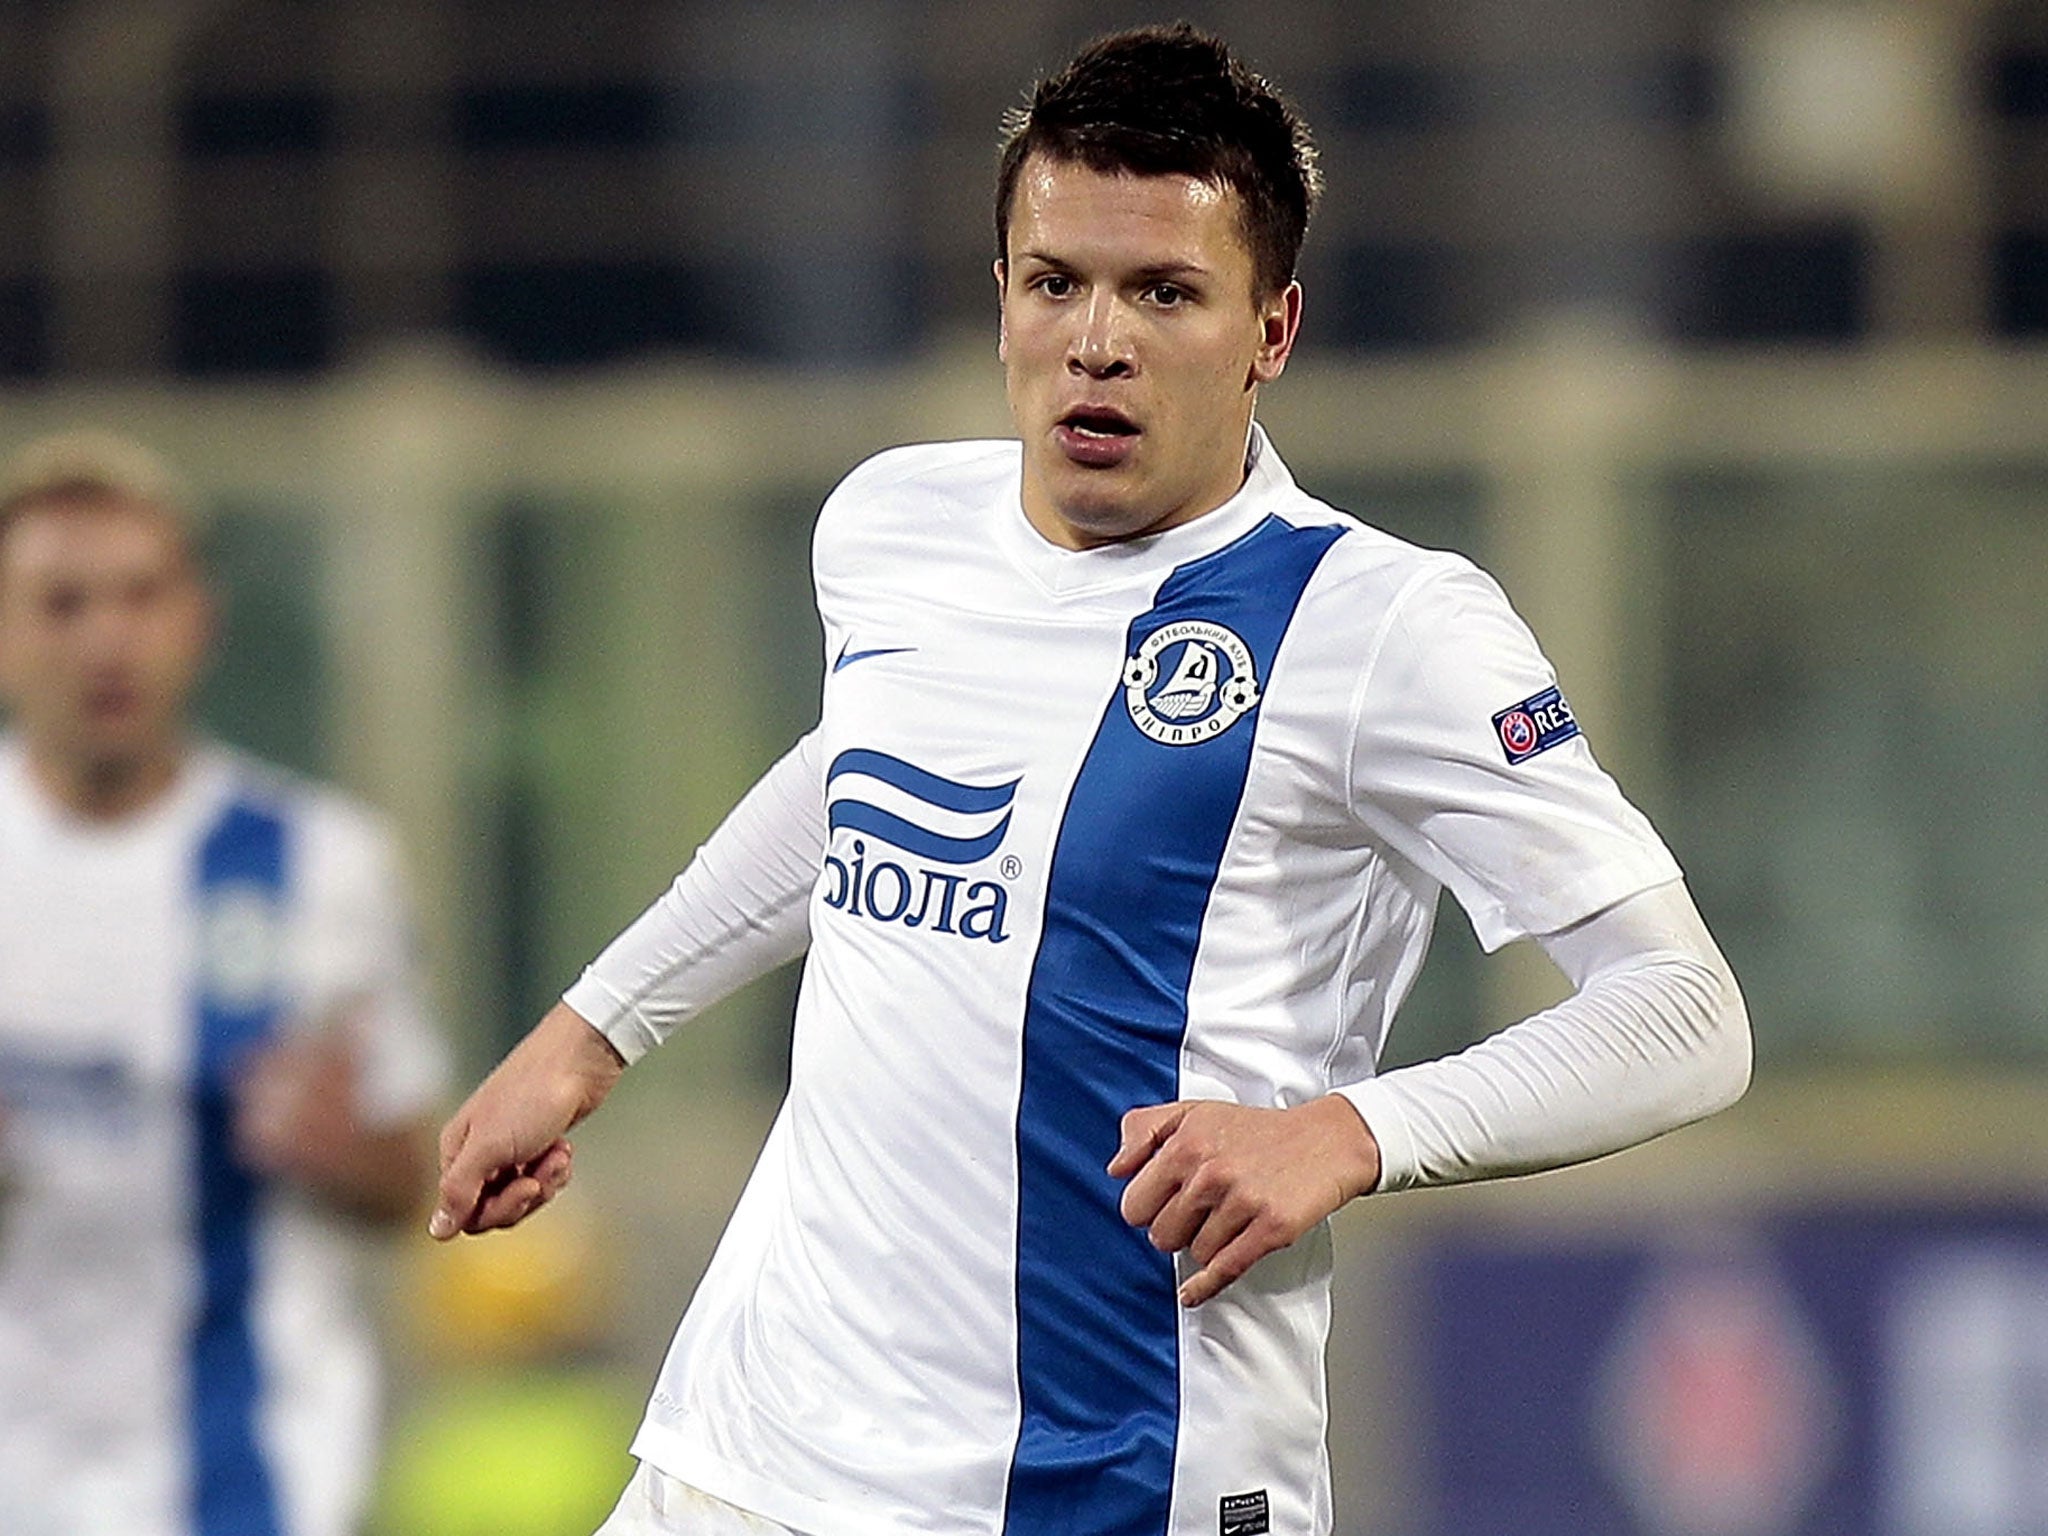 Yevhen Konoplyanka who missed out on a move to Liverpool last year